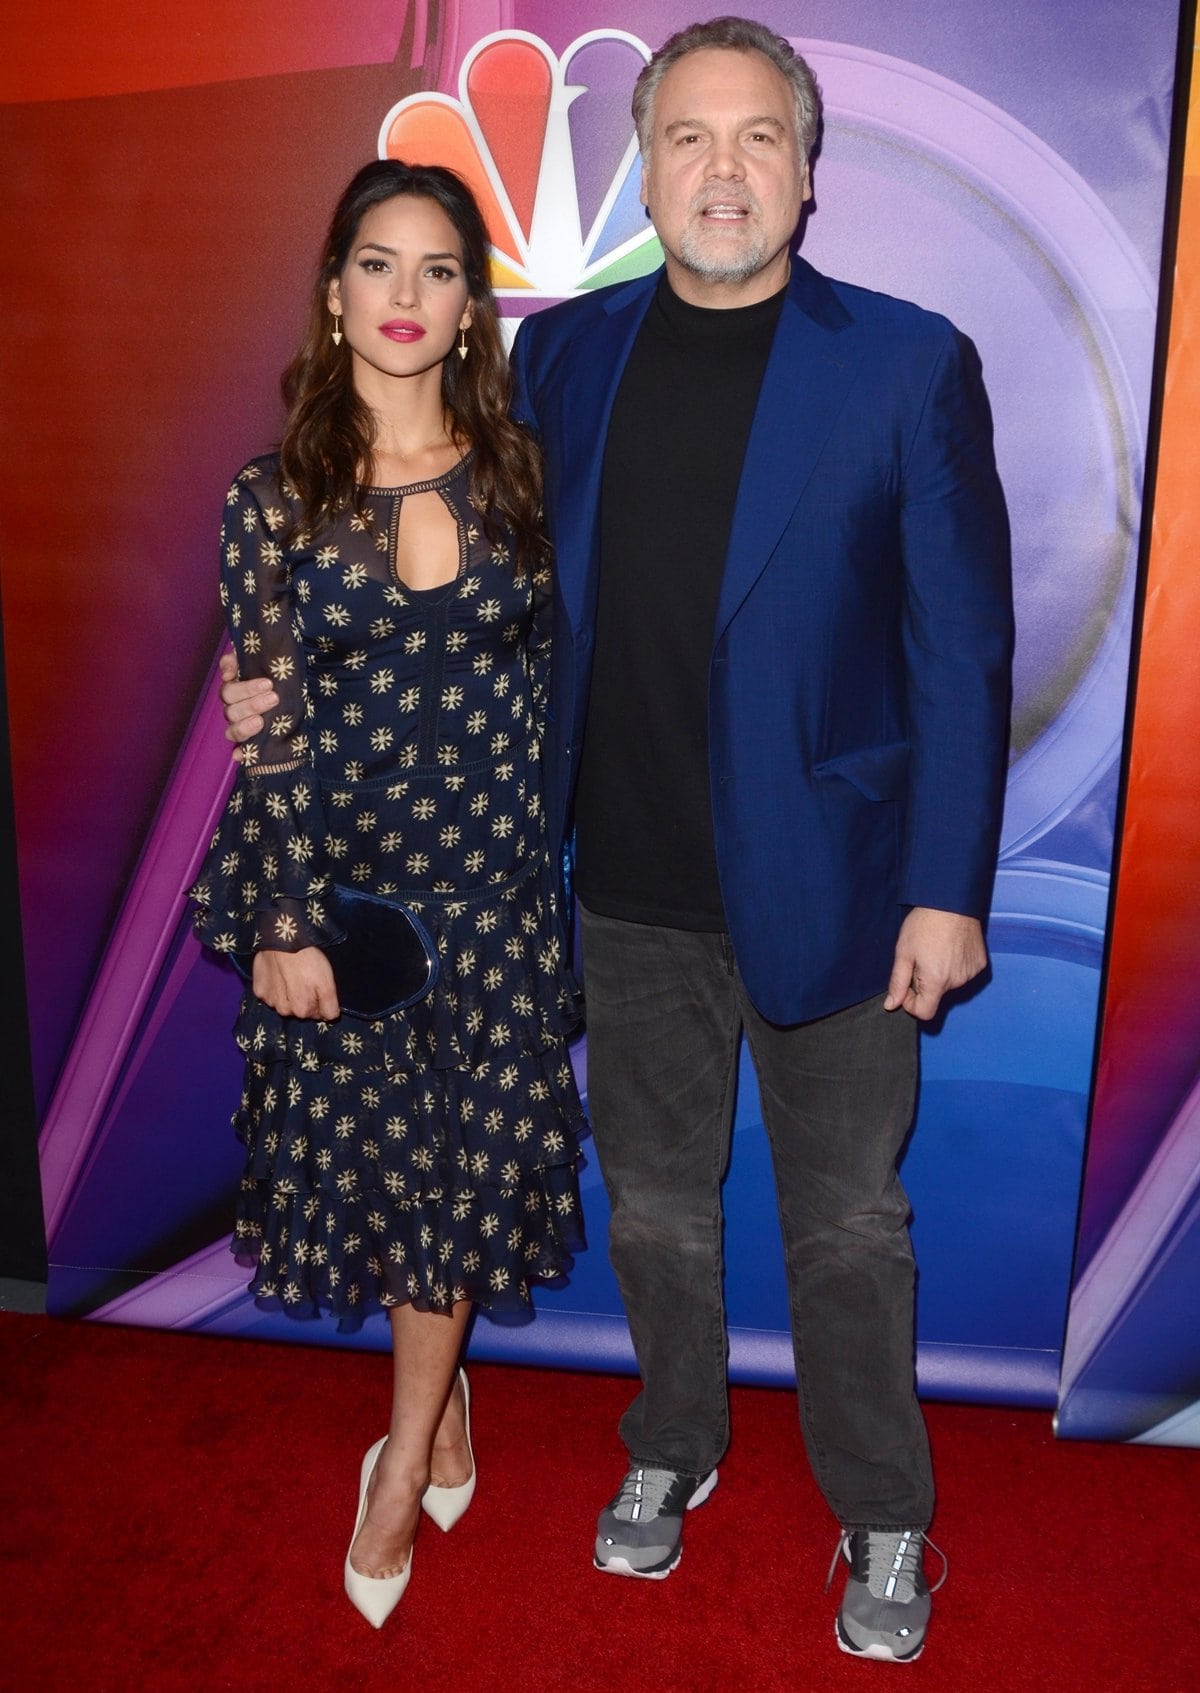 Vincent D'Onofrio and his co-star Adria Arjona promote their fantasy drama television series Emerald City